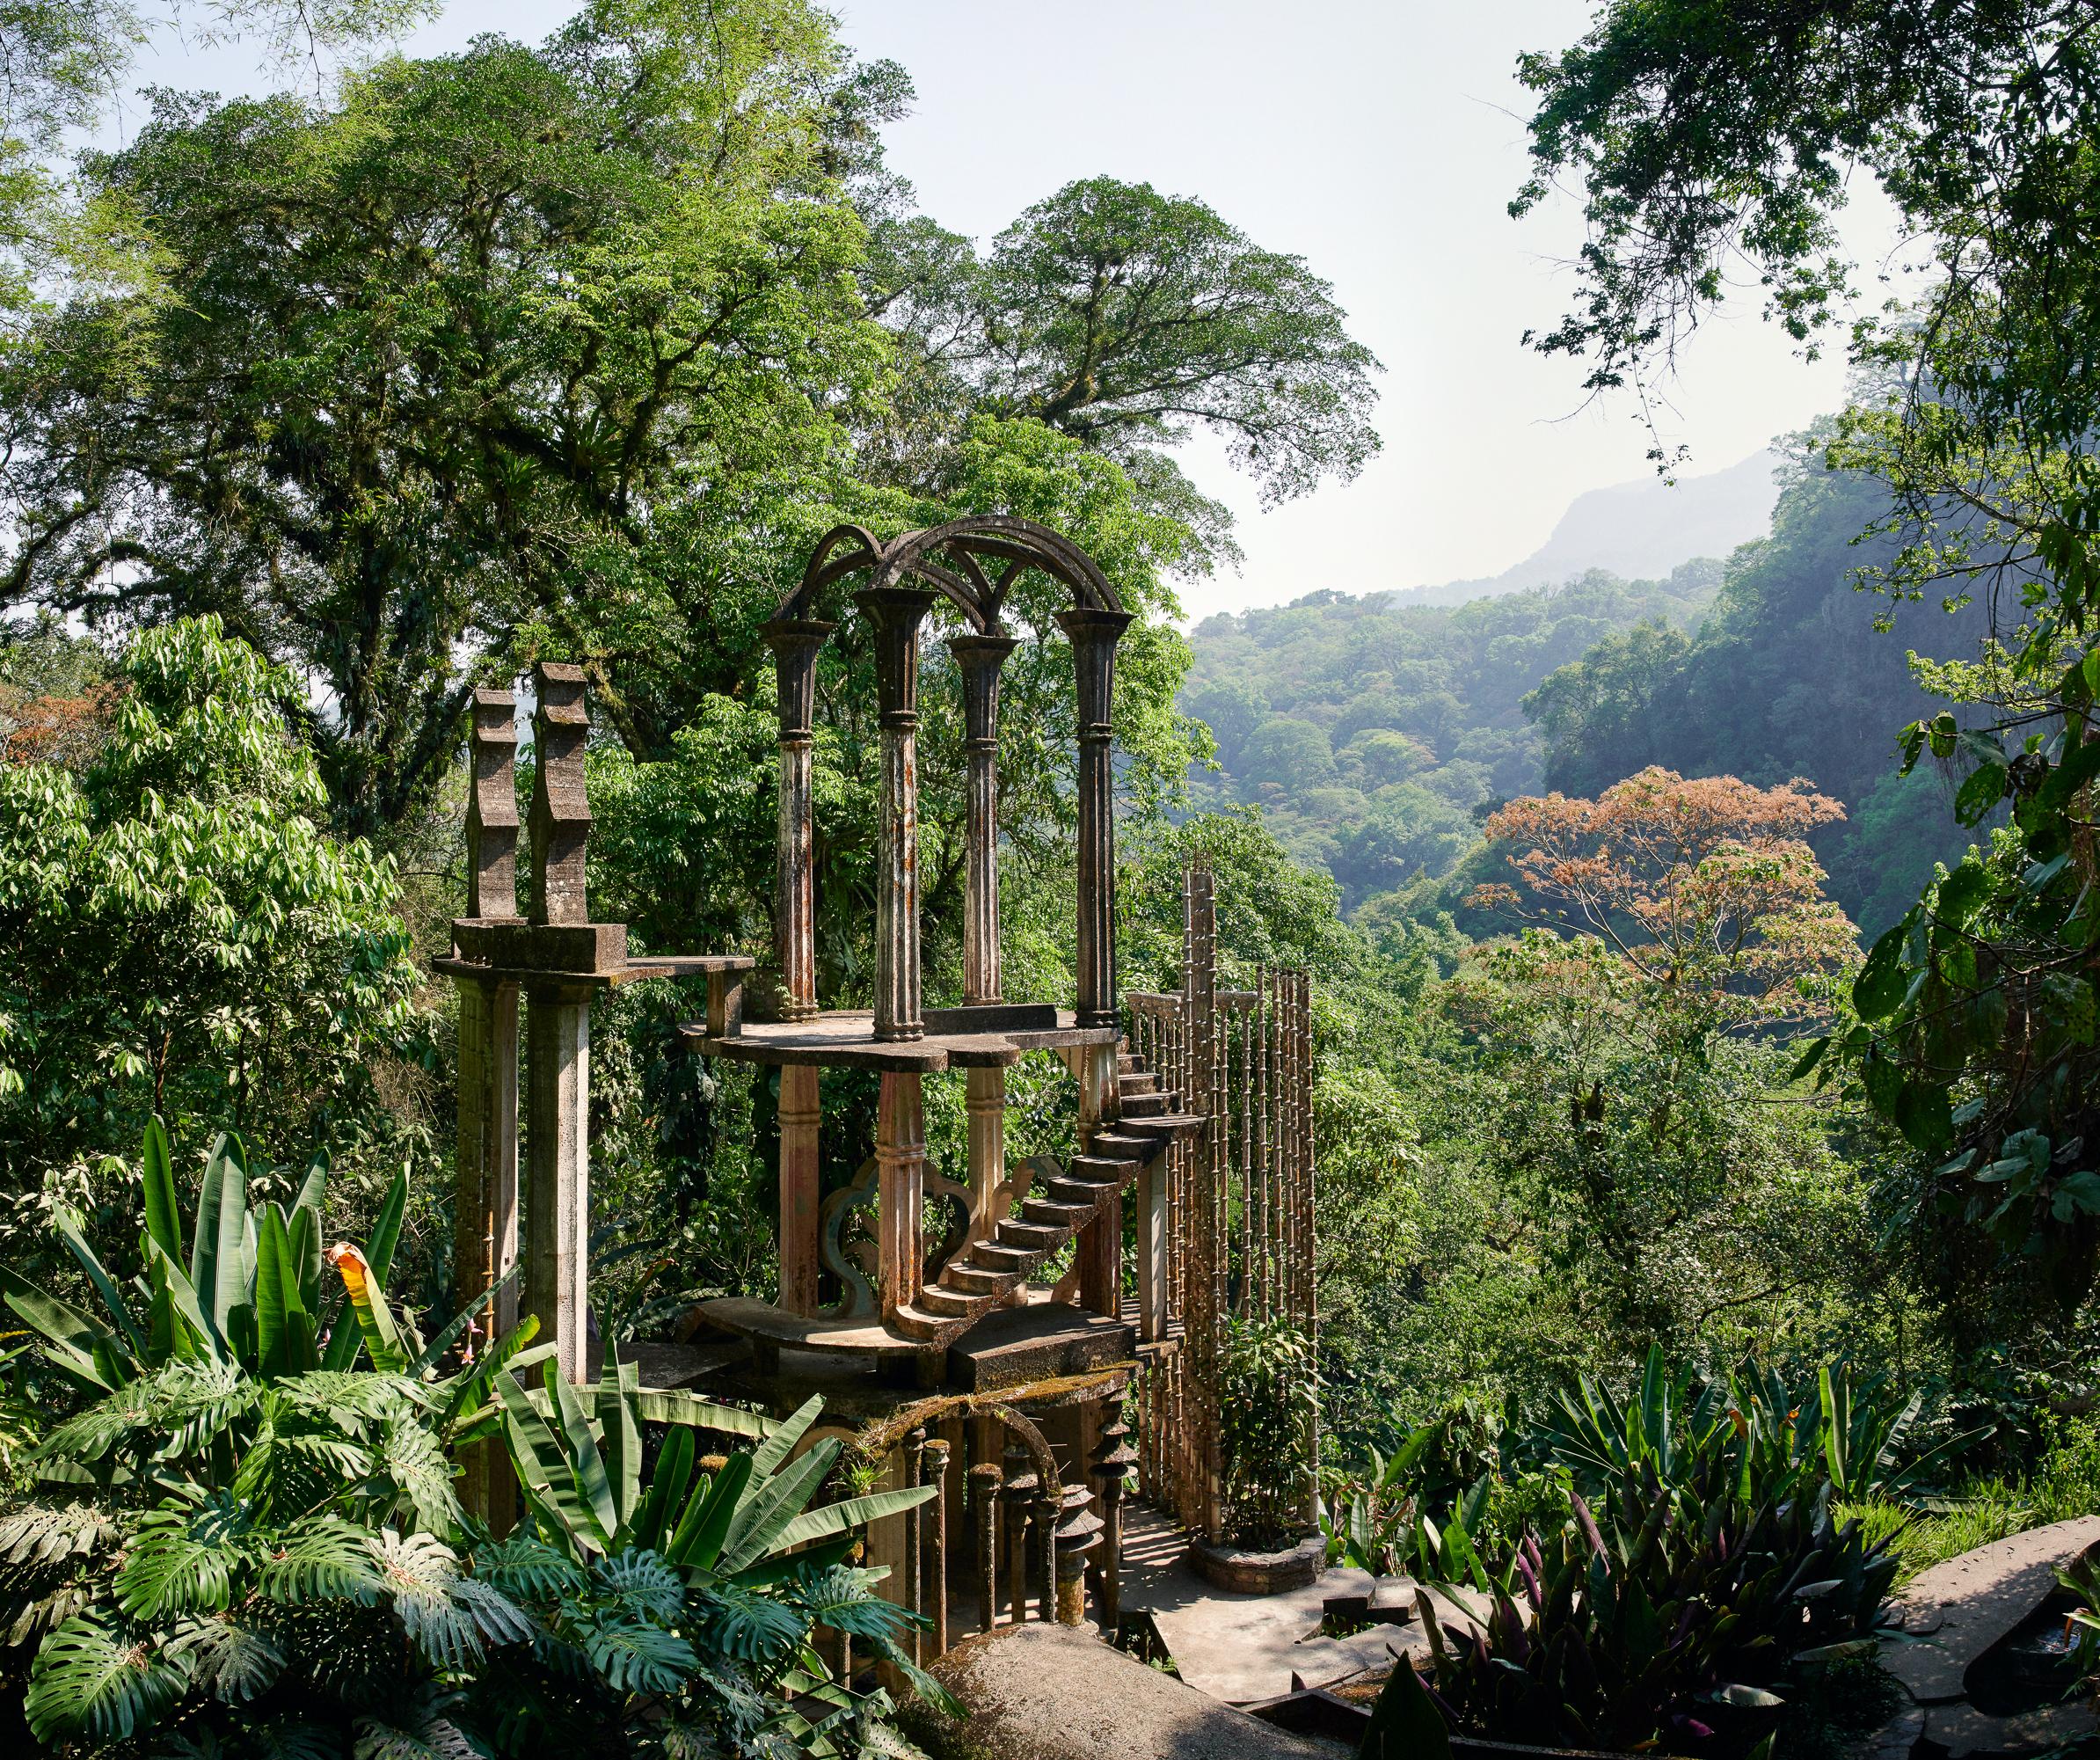 Troy House - Las Pozas #1, Photography 2019, Printed After